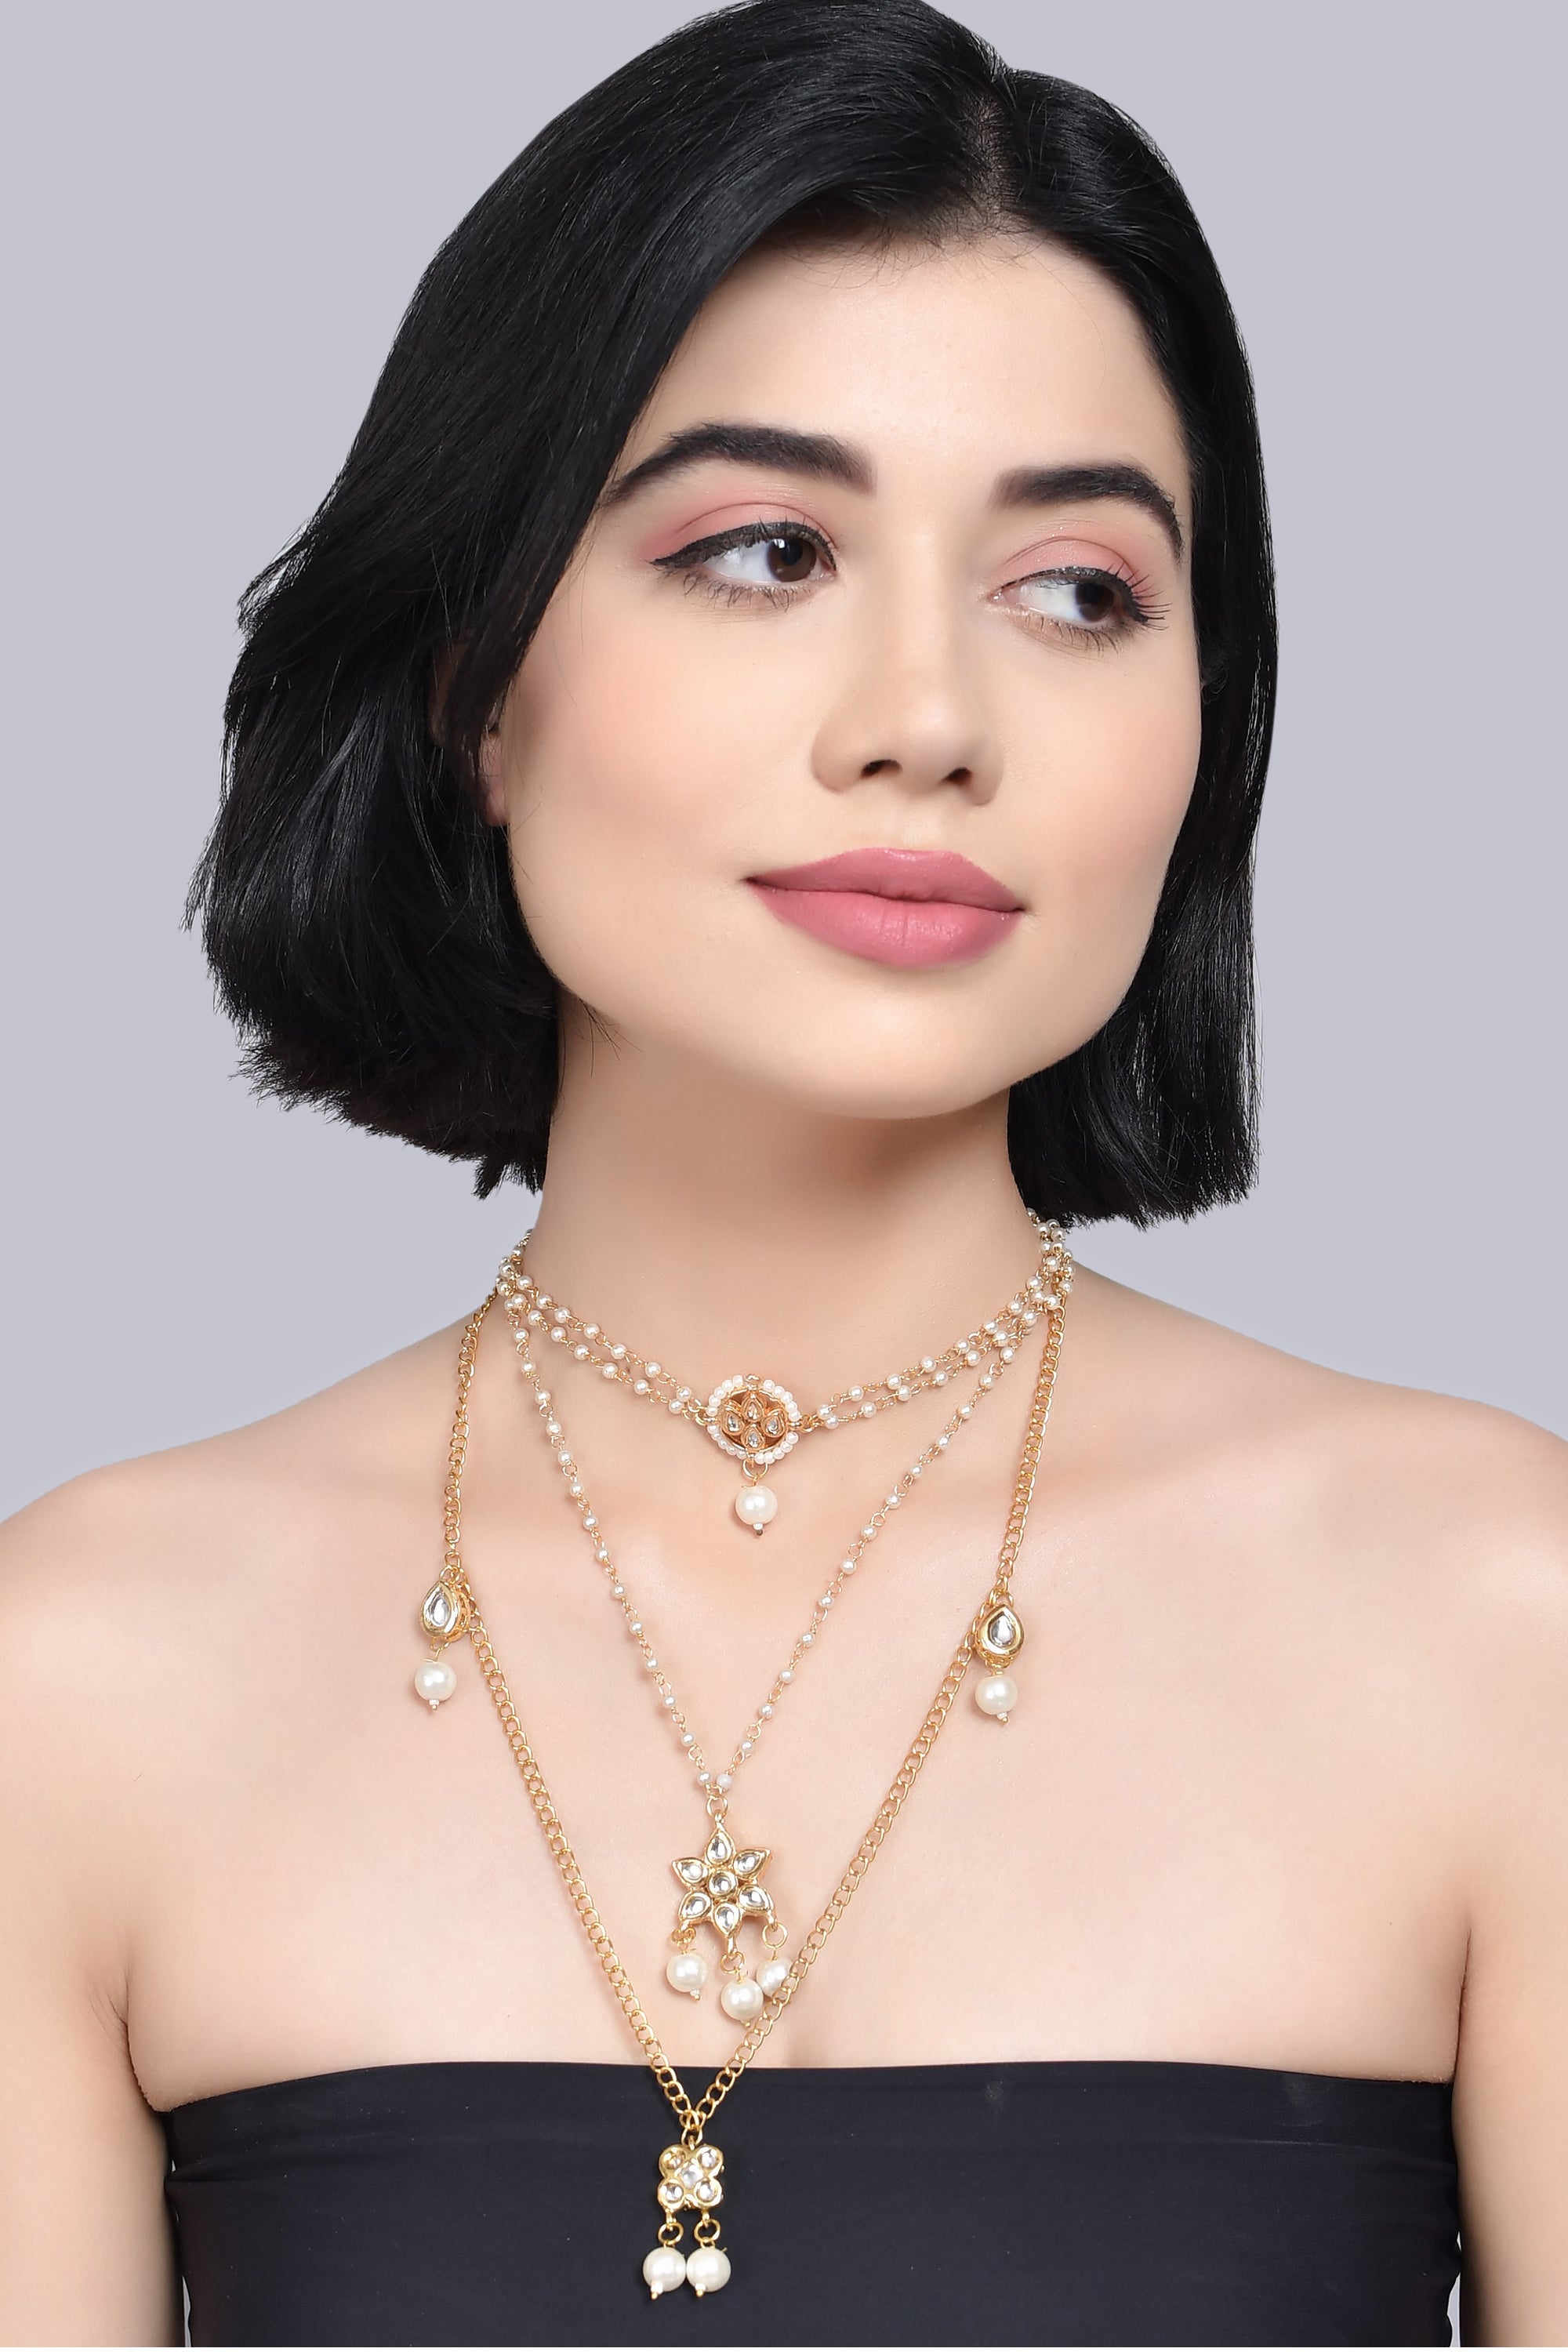 Multilayered pearl beaded Kundan embellished necklace teamed with choker